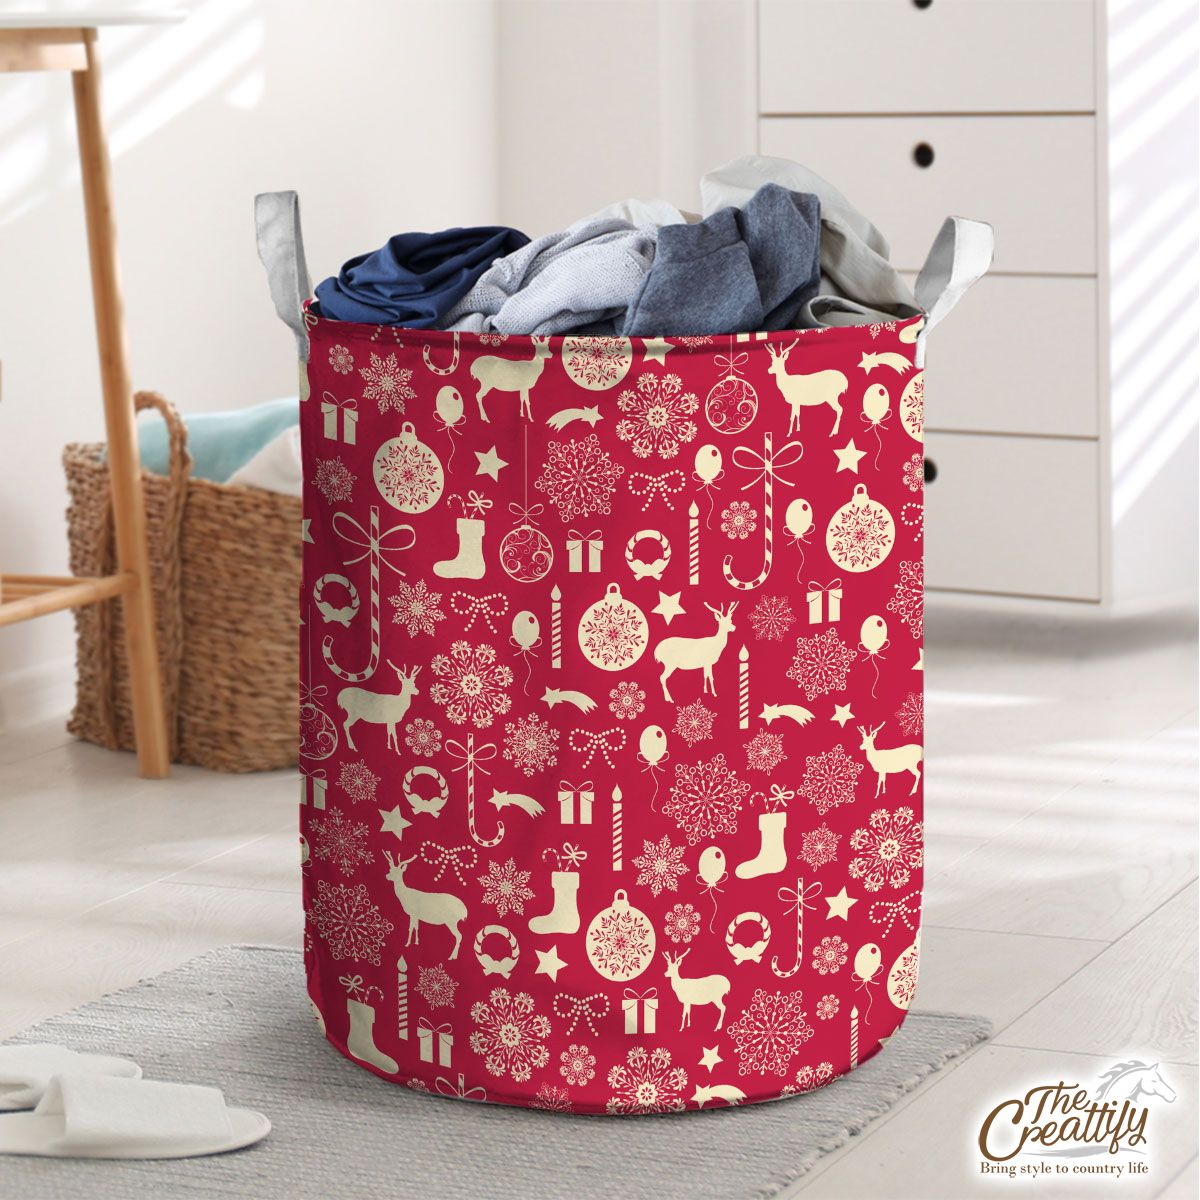 Happy Christmas With Reindeer, Christmas Balls, Socks, Candy Canes On Snowflake Background Laundry Basket